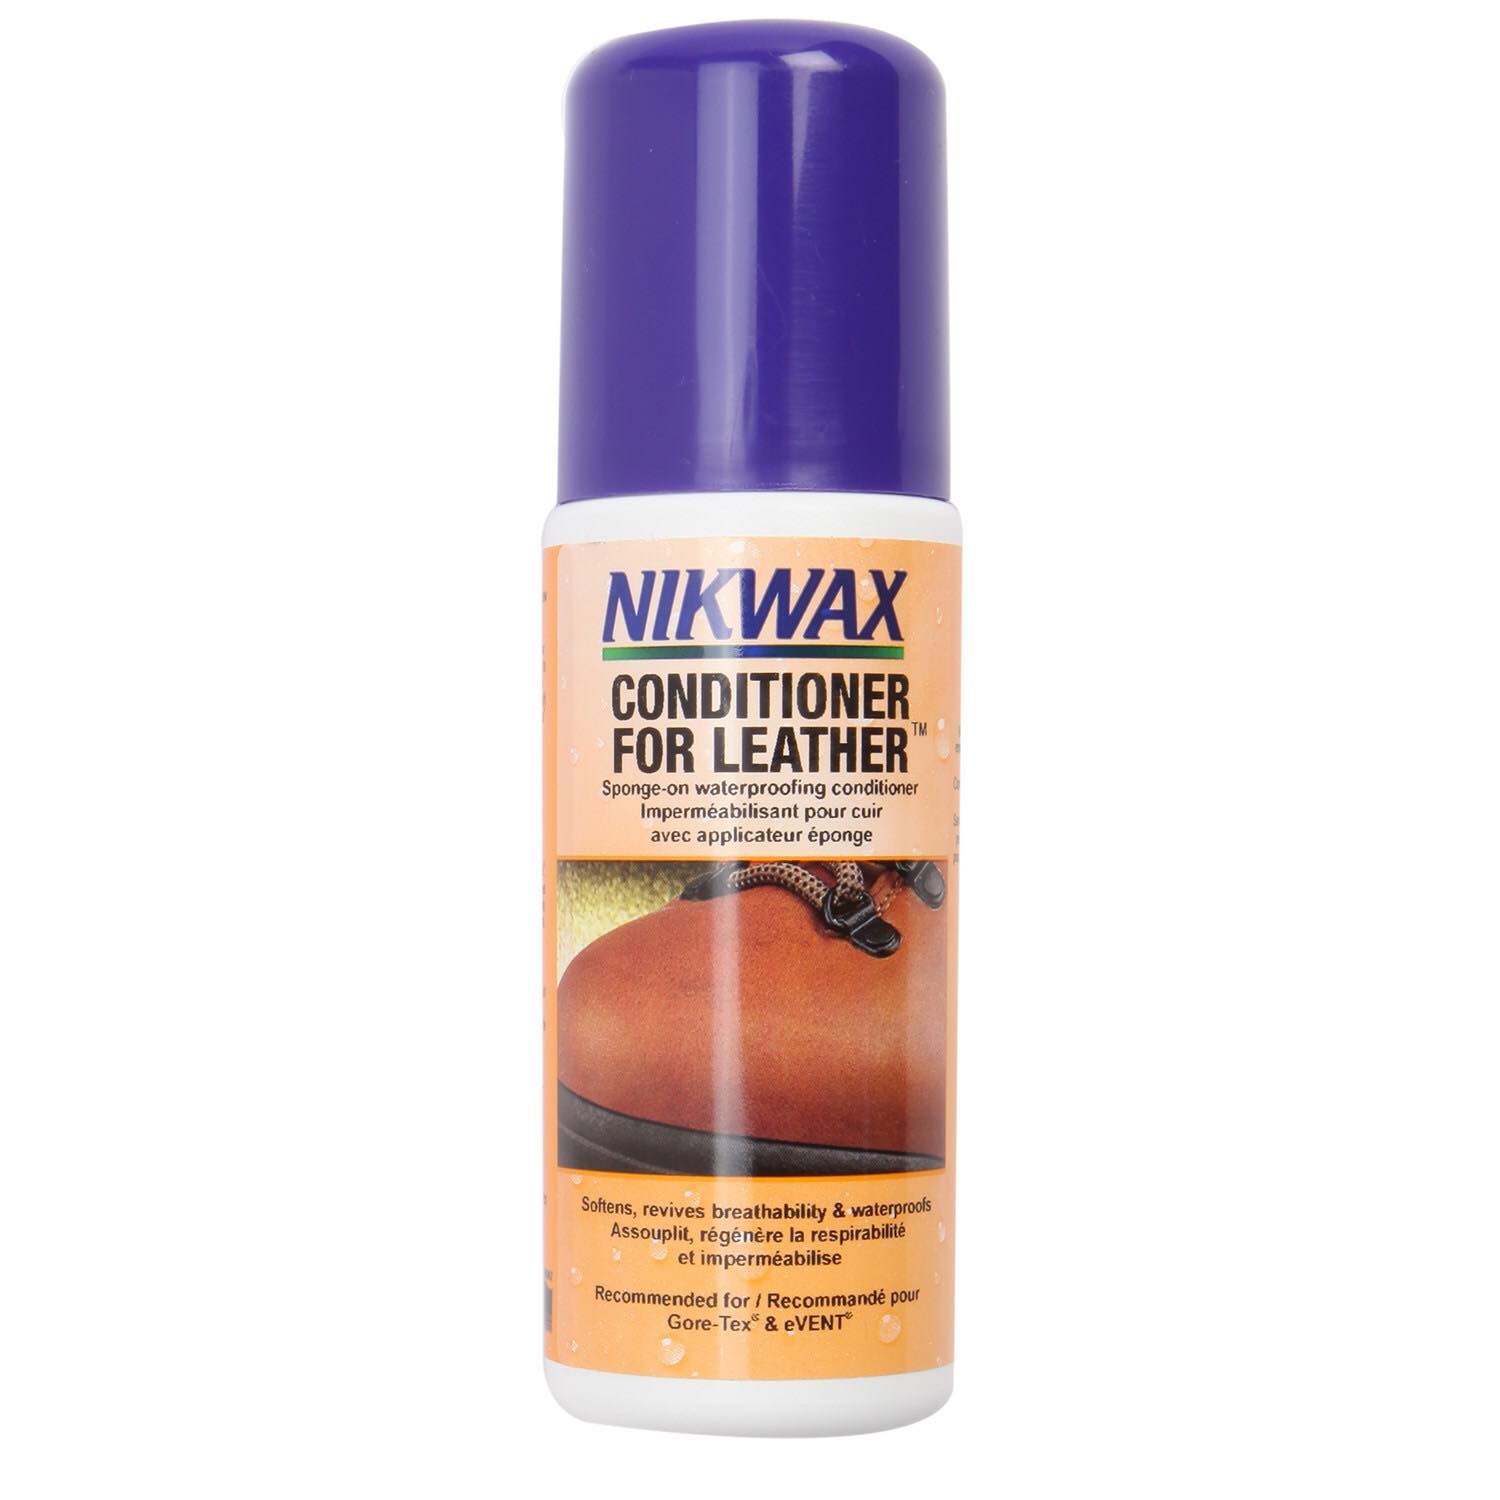 NikWax - Conditioner For Leather